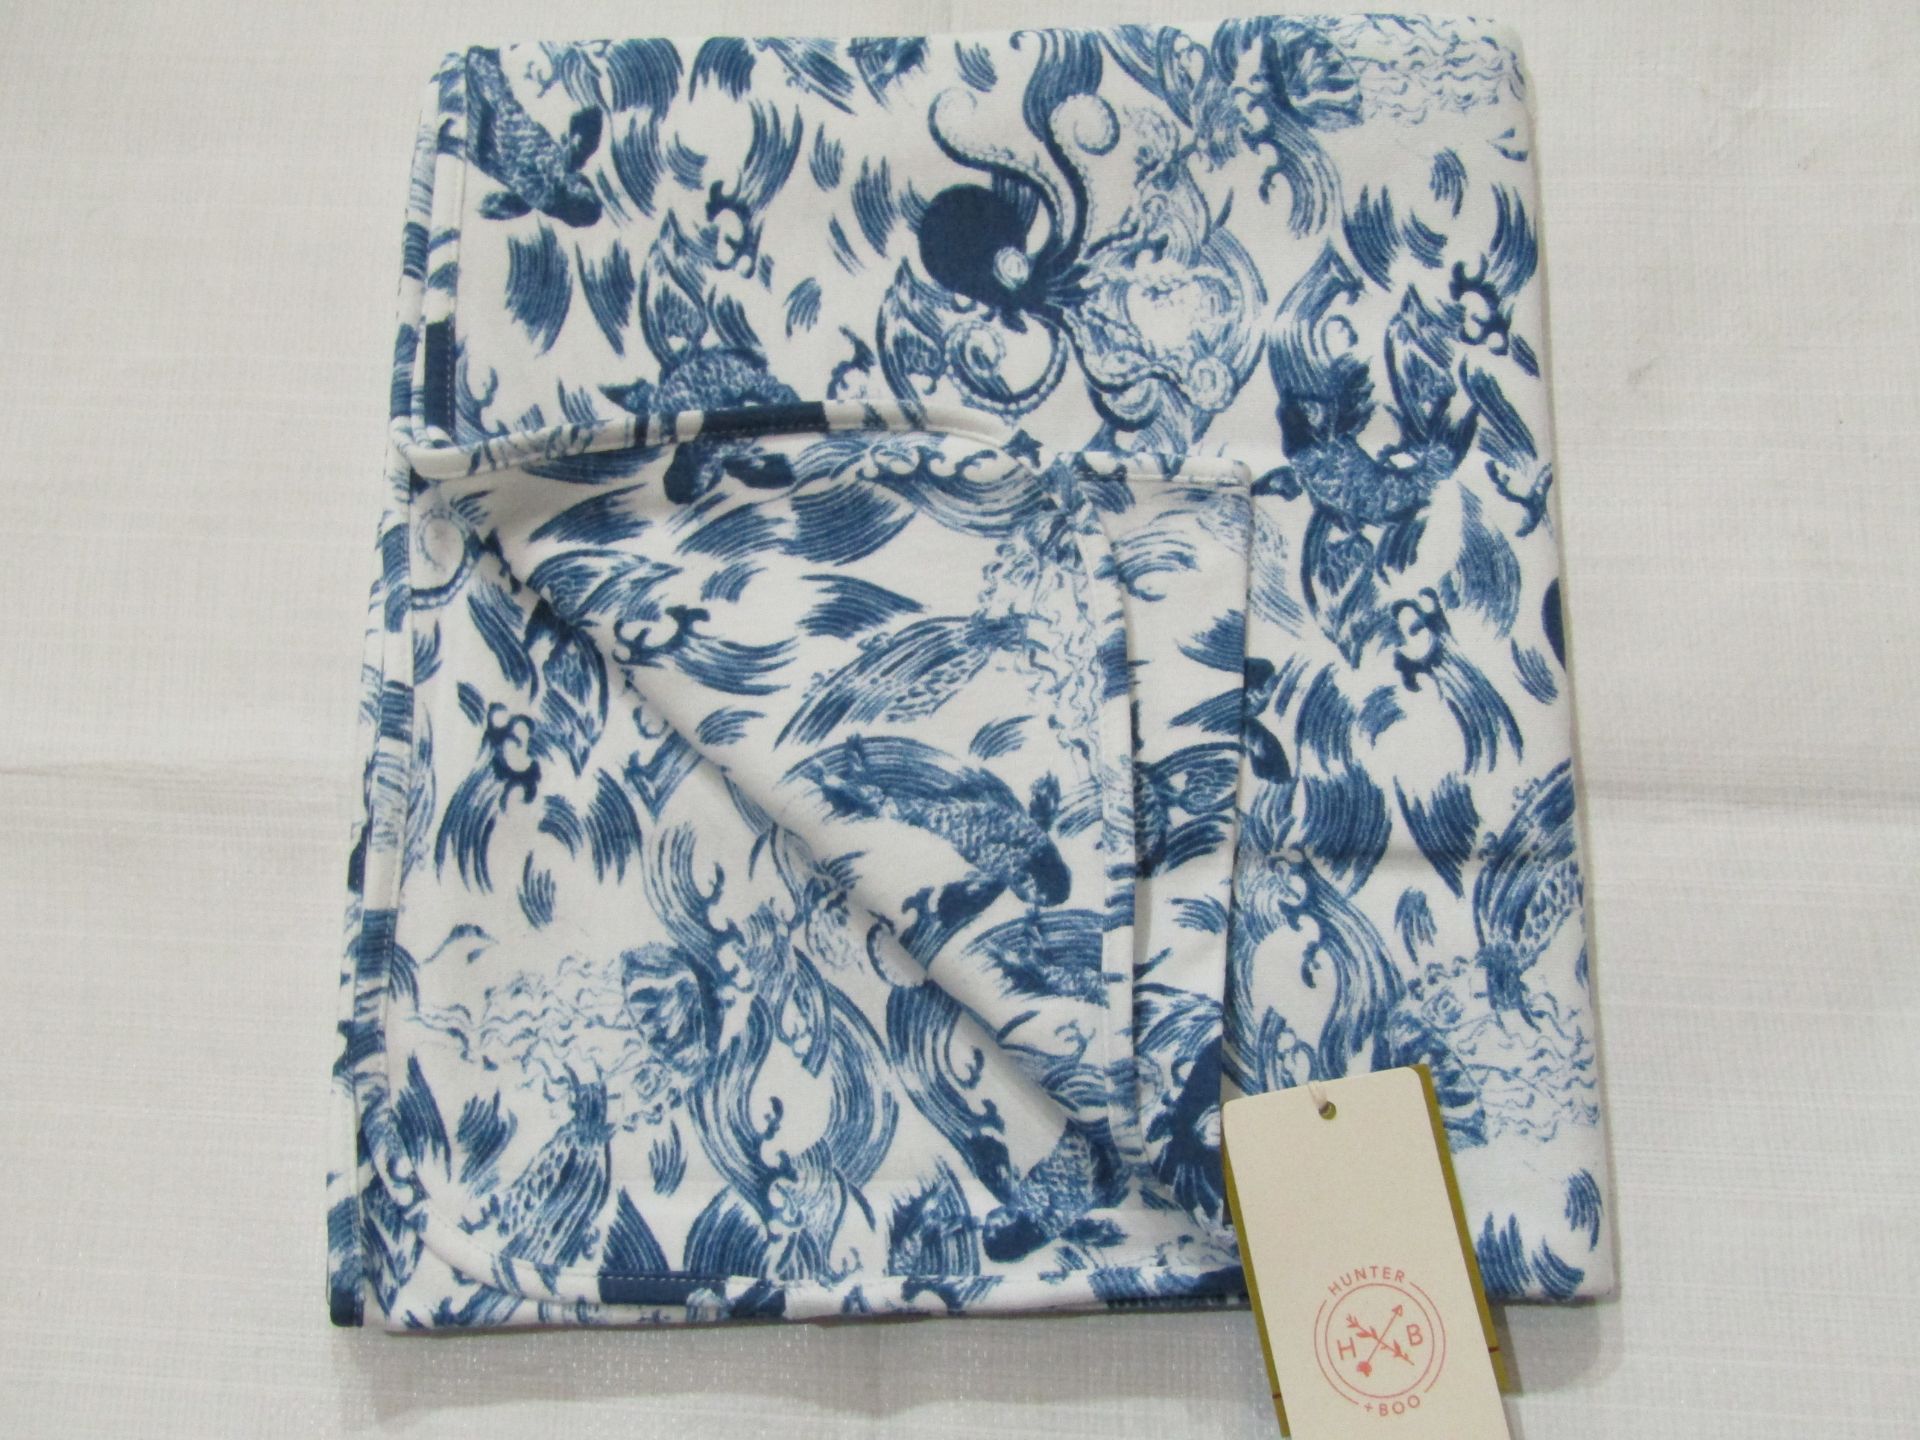 Hunter & Boo Blanket Kayio Print Approx Size 120 X 90 CM 100 % Organic Cotton New & Packaged RRP £